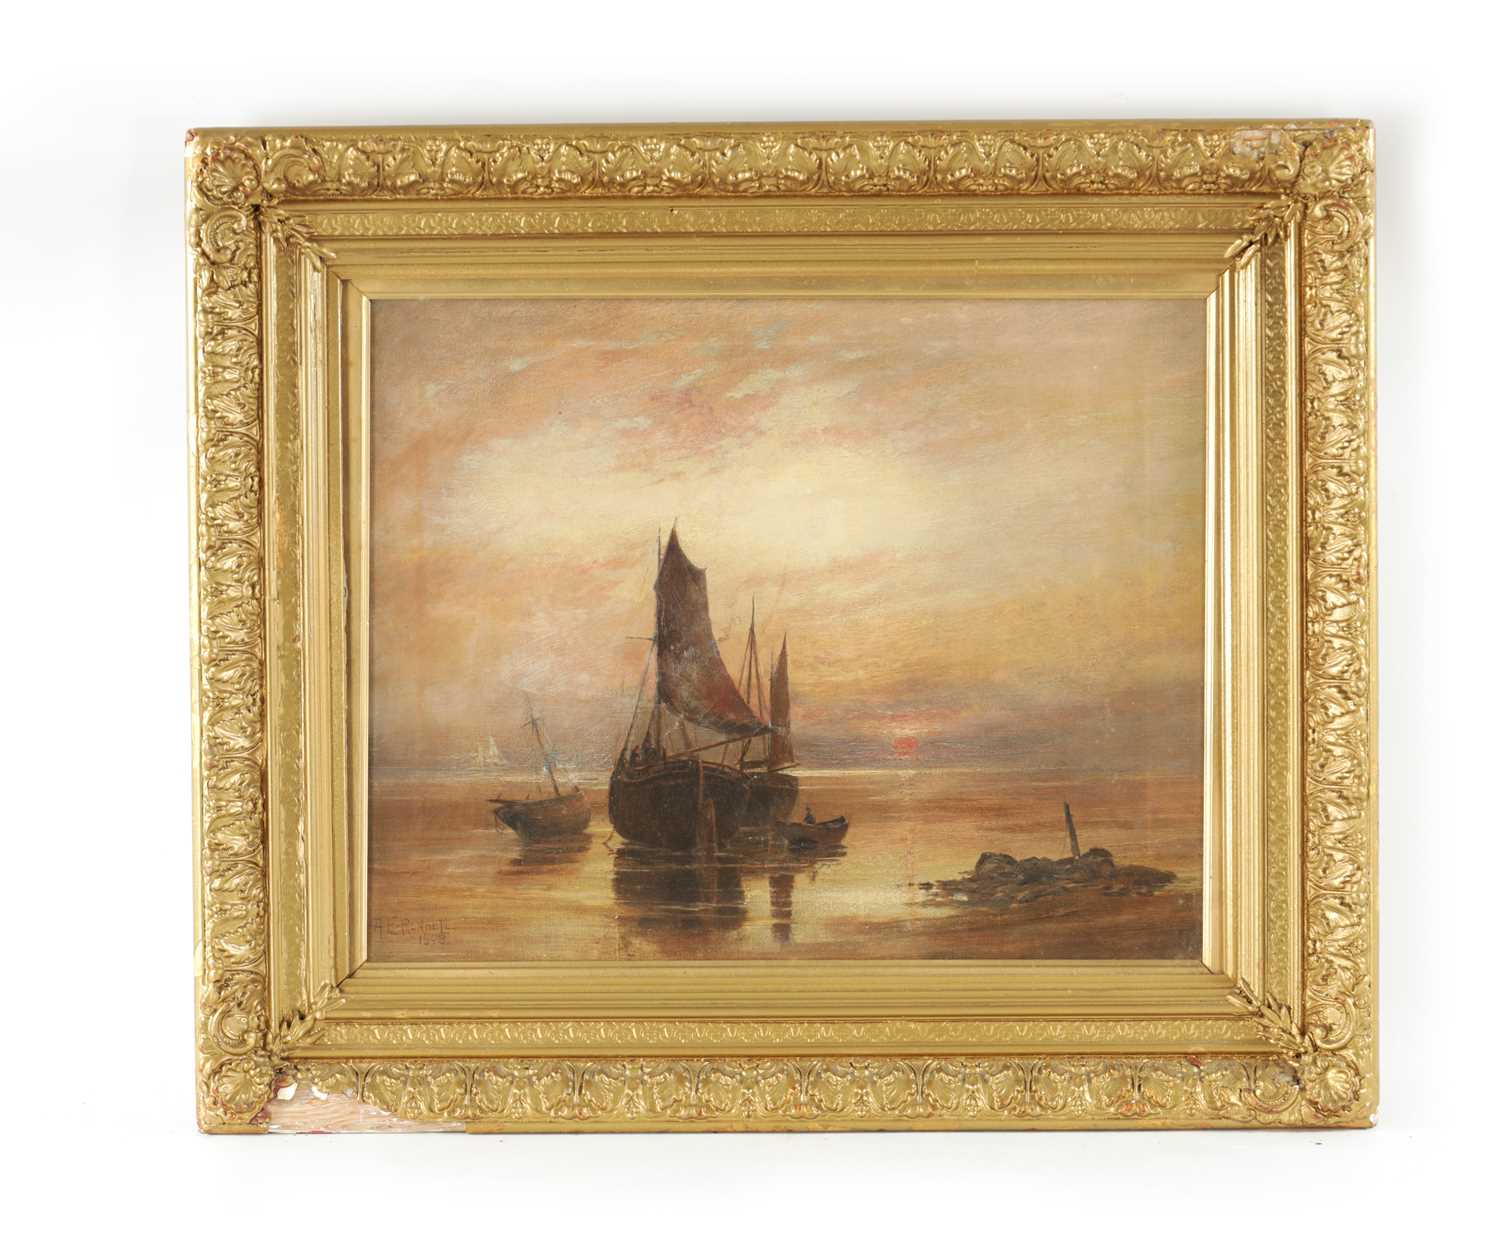 Lot 1146 - R. E. RENDELL AN EARLY 20TH CENTURY OIL ON CANVAS